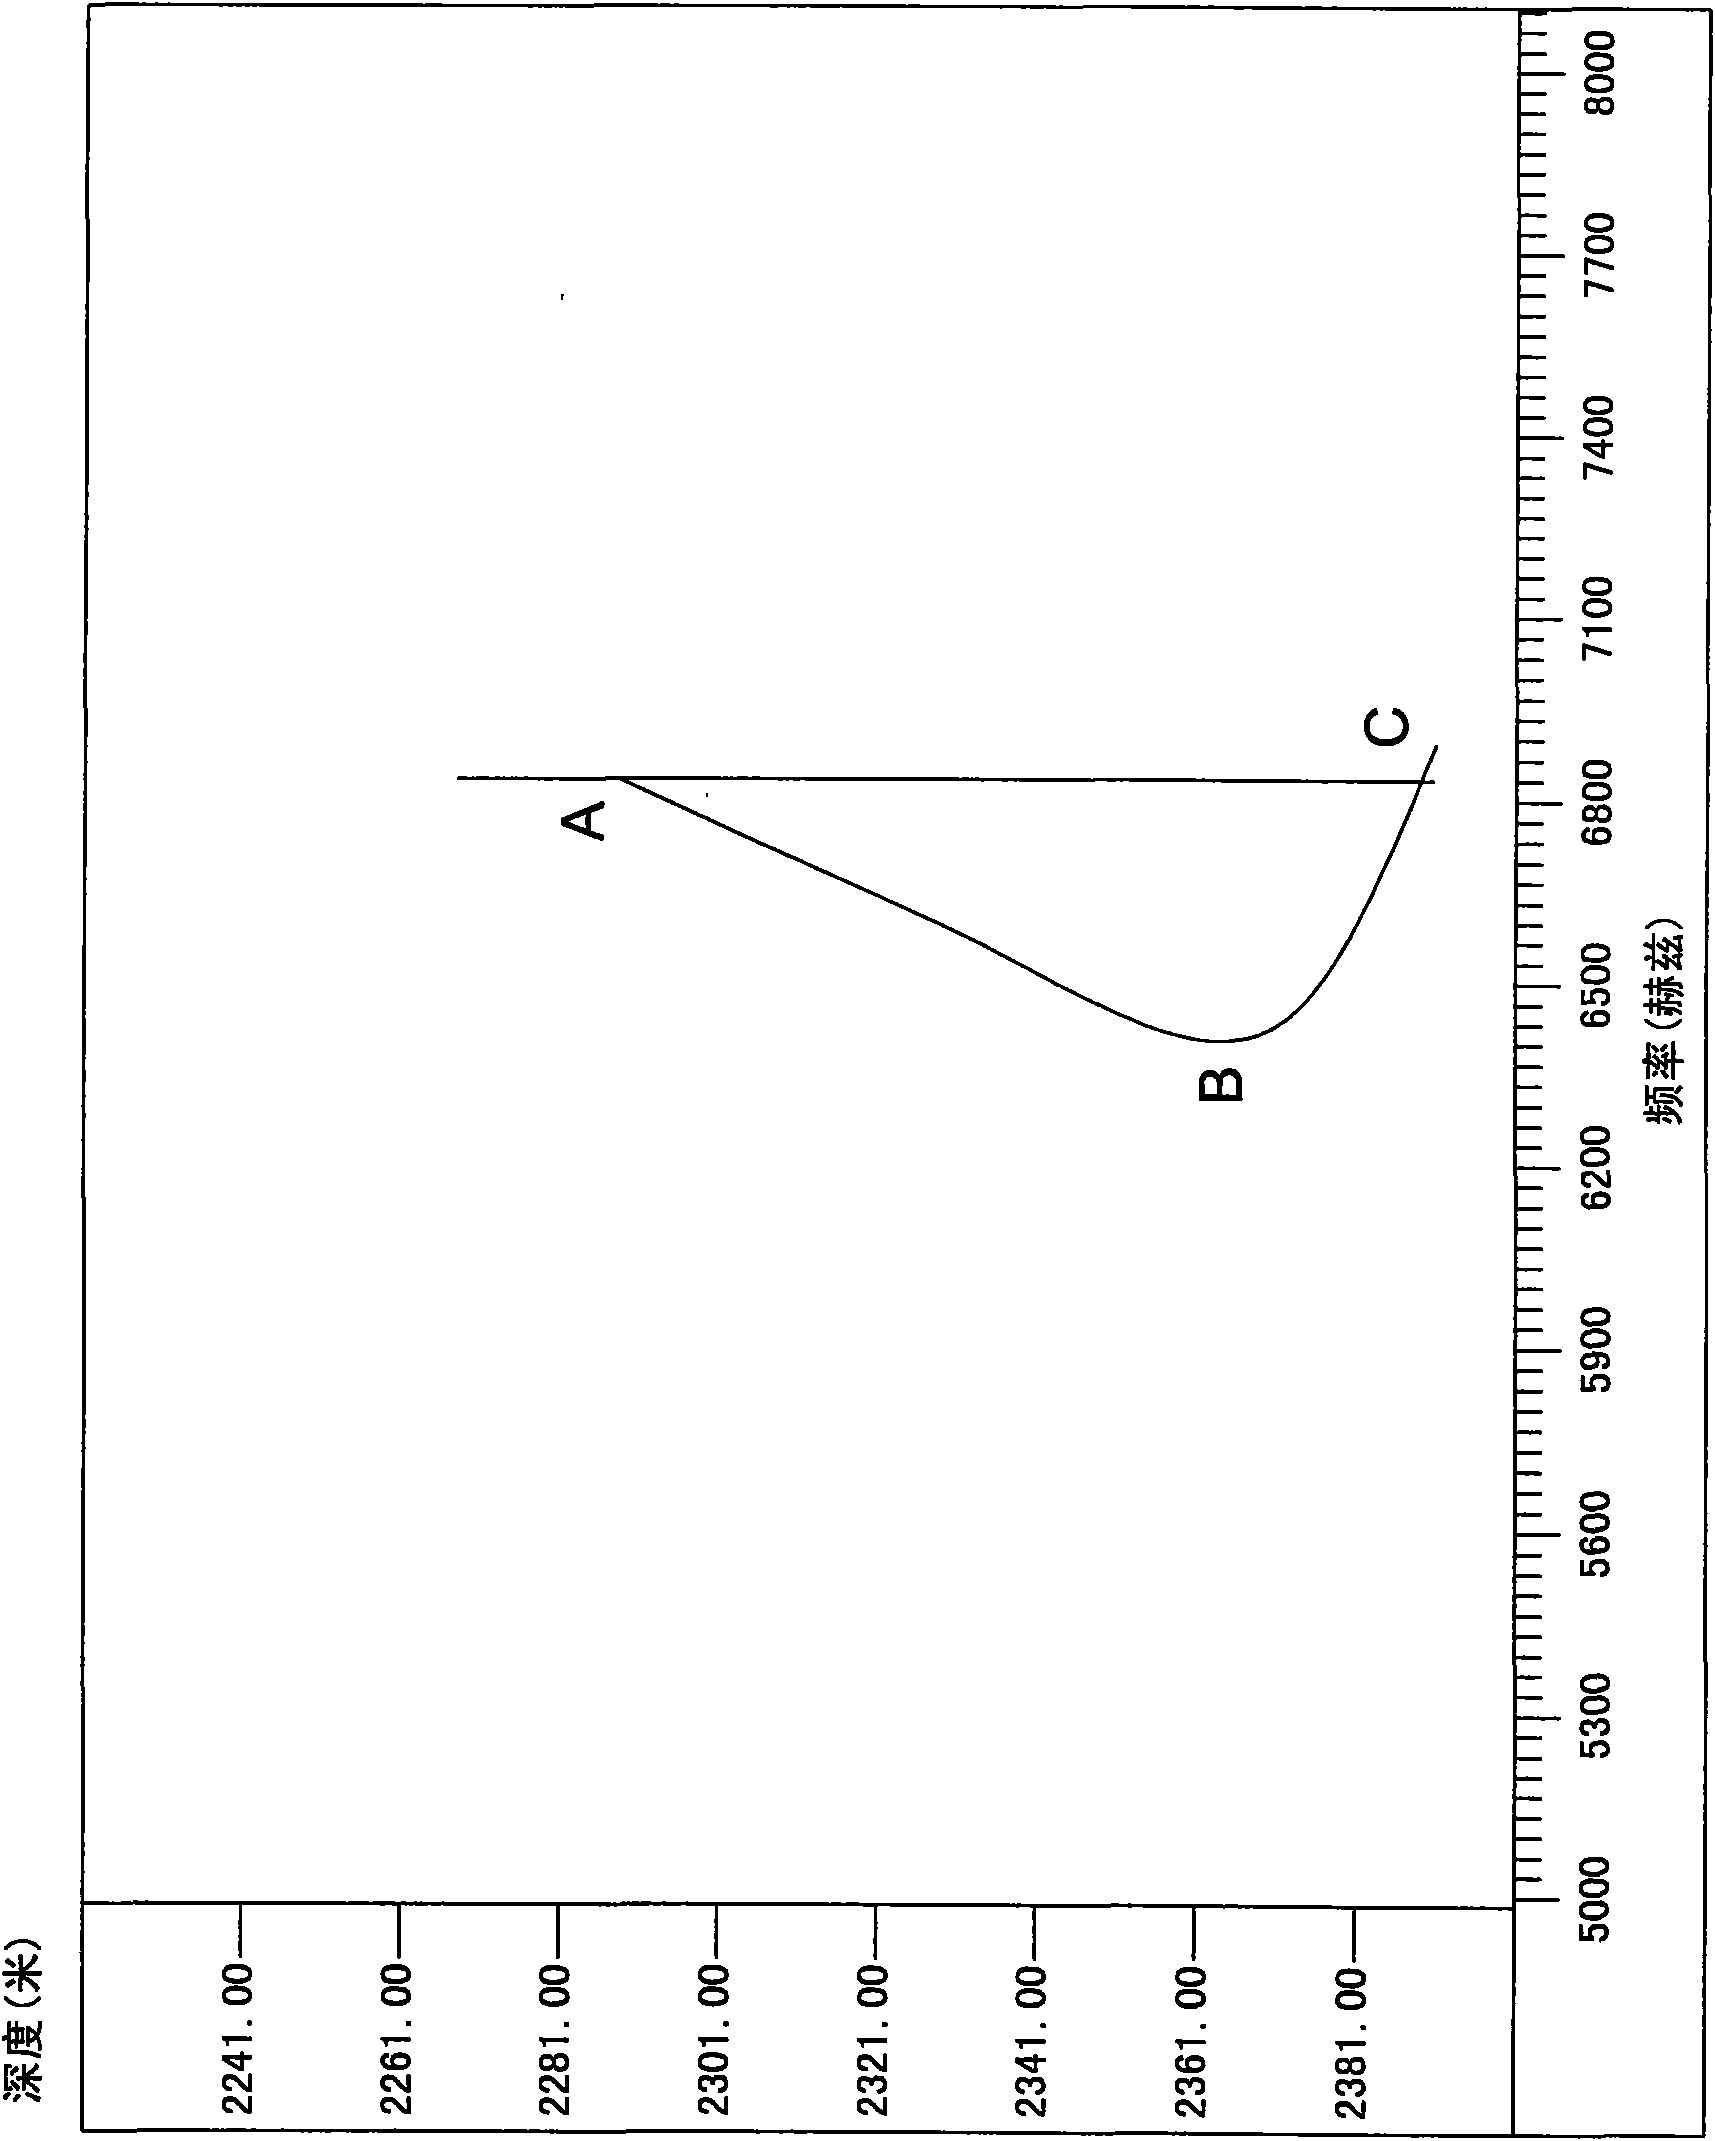 Lithology while drilling and reservoir characteristics recognizing method